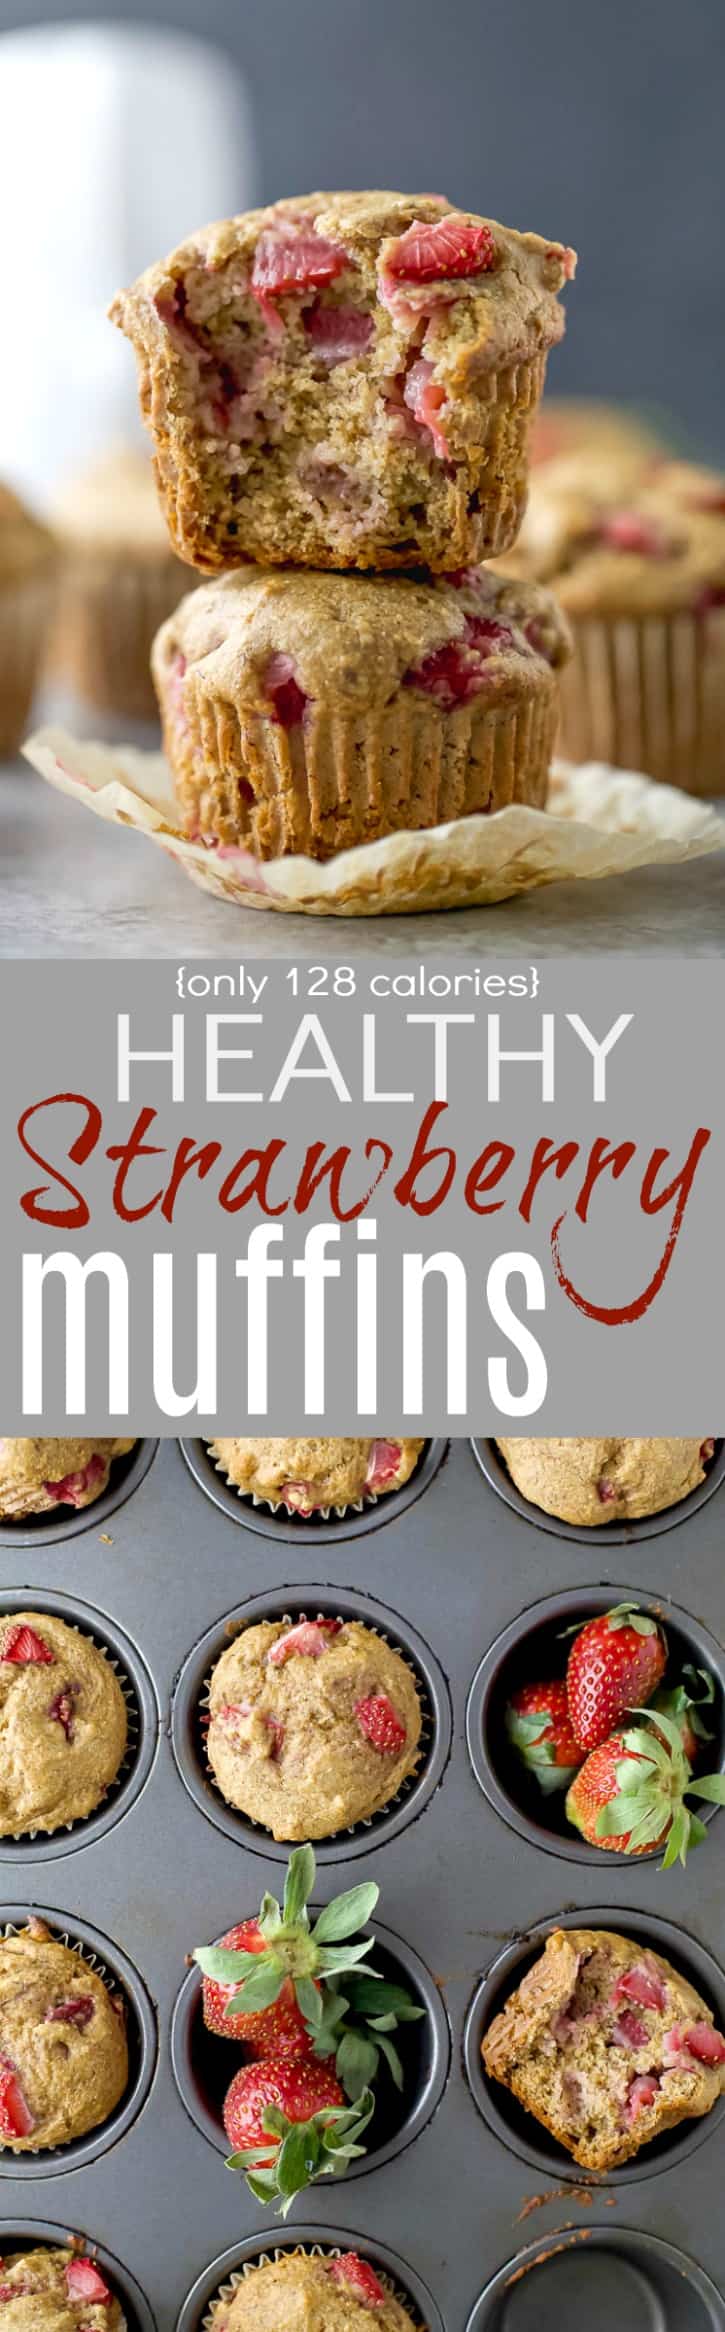 Image of Strawberry Muffins in a Muffin Tin